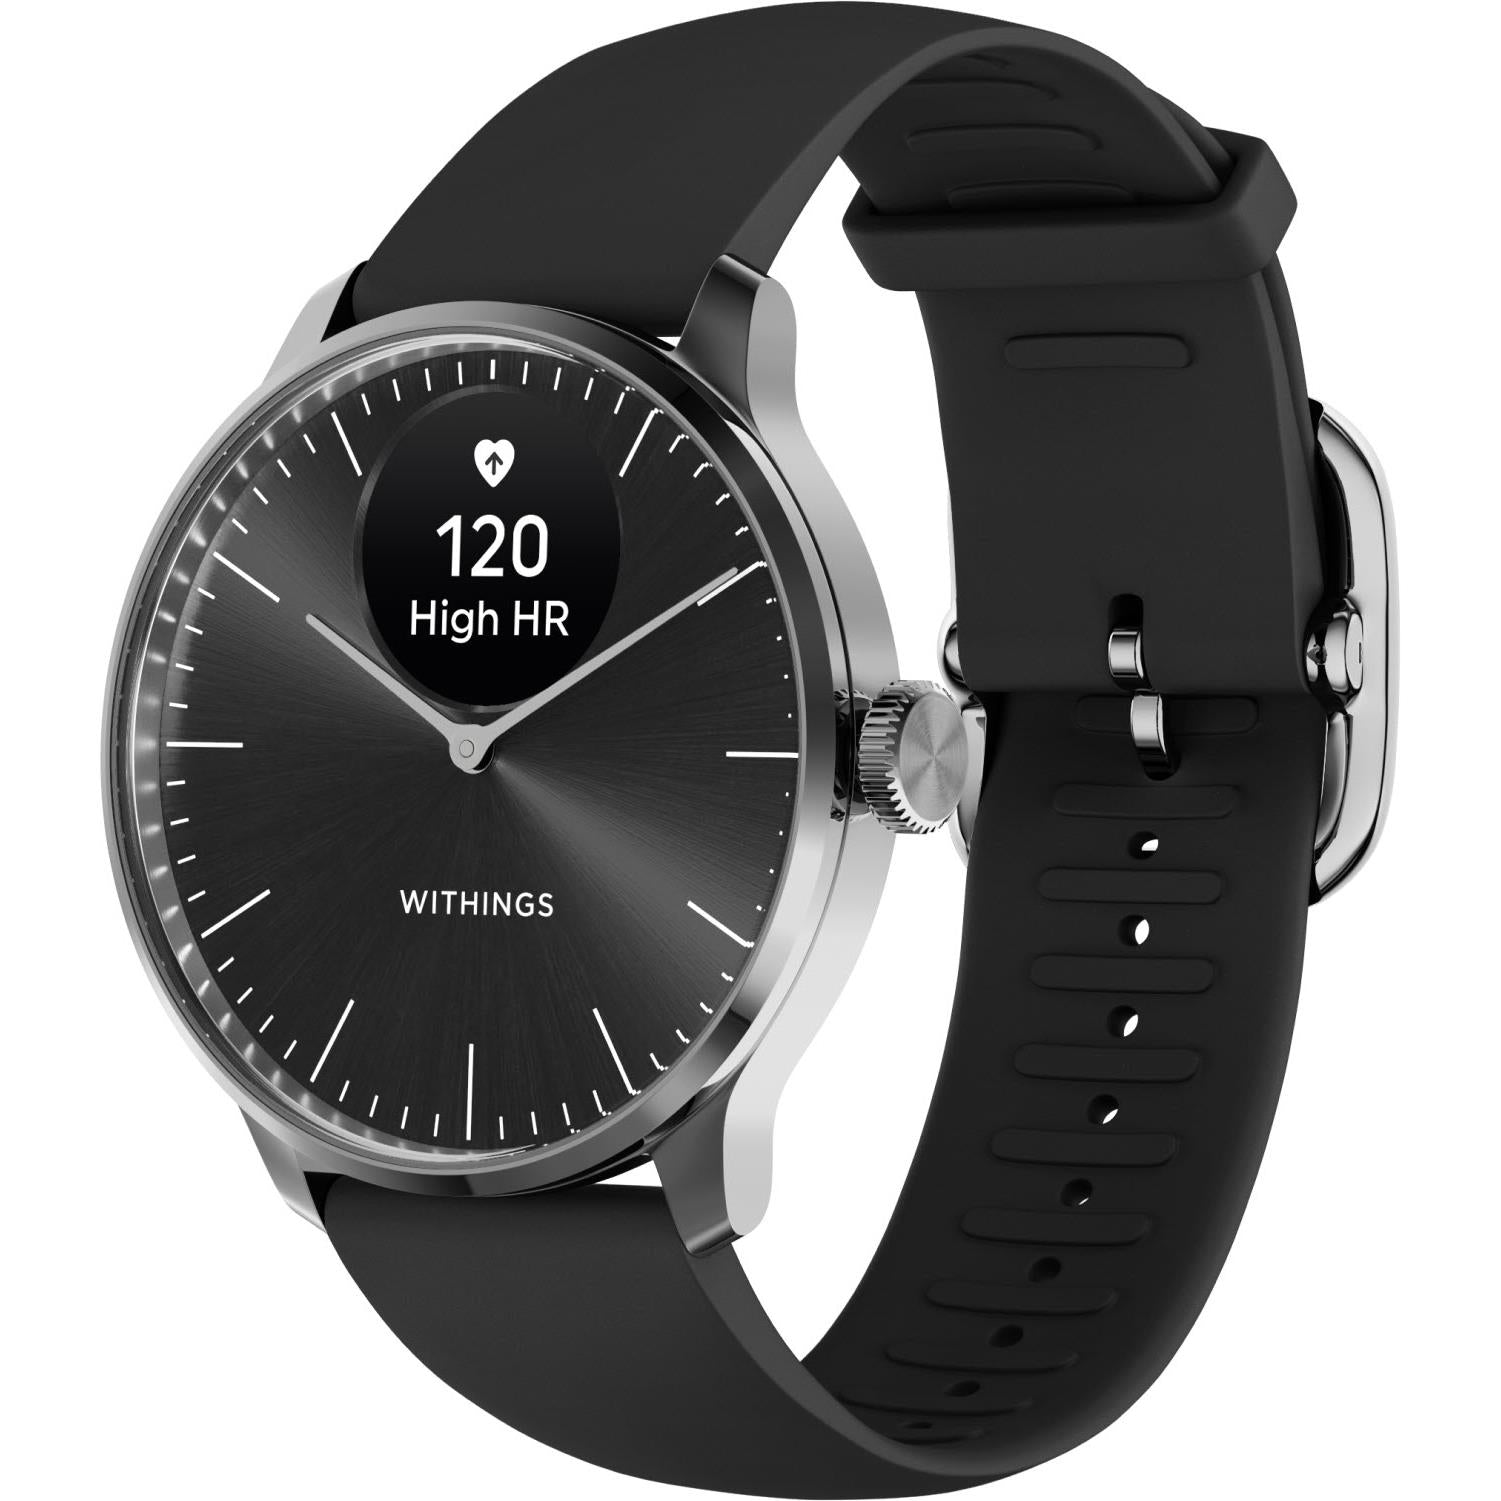 Withings ScanWatch 2 Review | Trusted Reviews